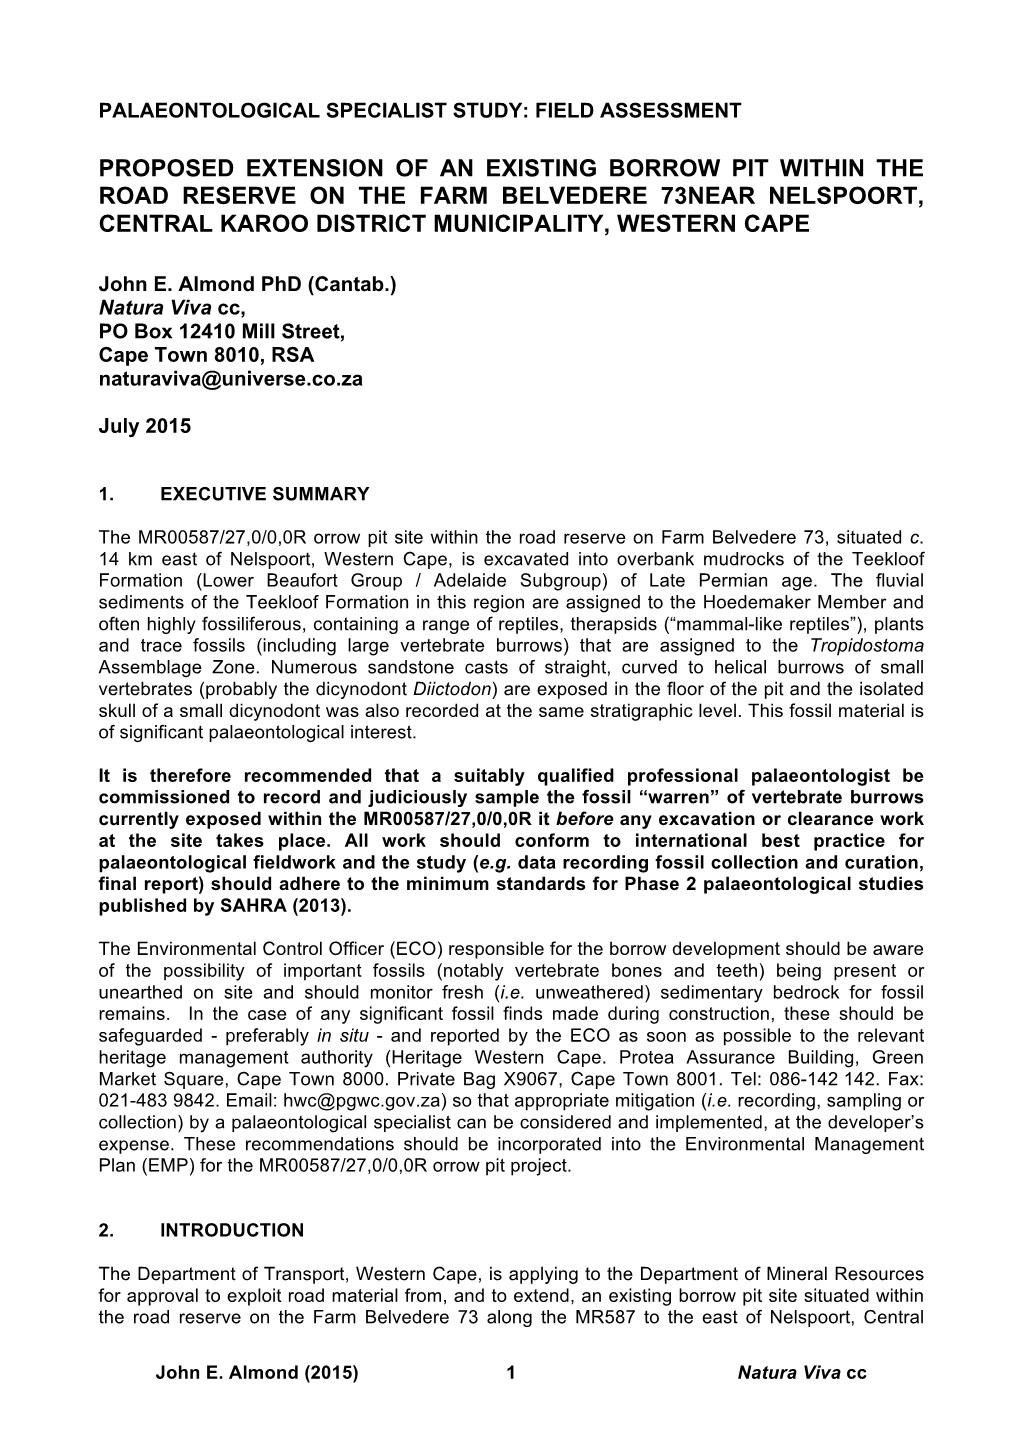 Proposed Extension of an Existing Borrow Pit Within the Road Reserve on the Farm Belvedere 73Near Nelspoort, Central Karoo District Municipality, Western Cape